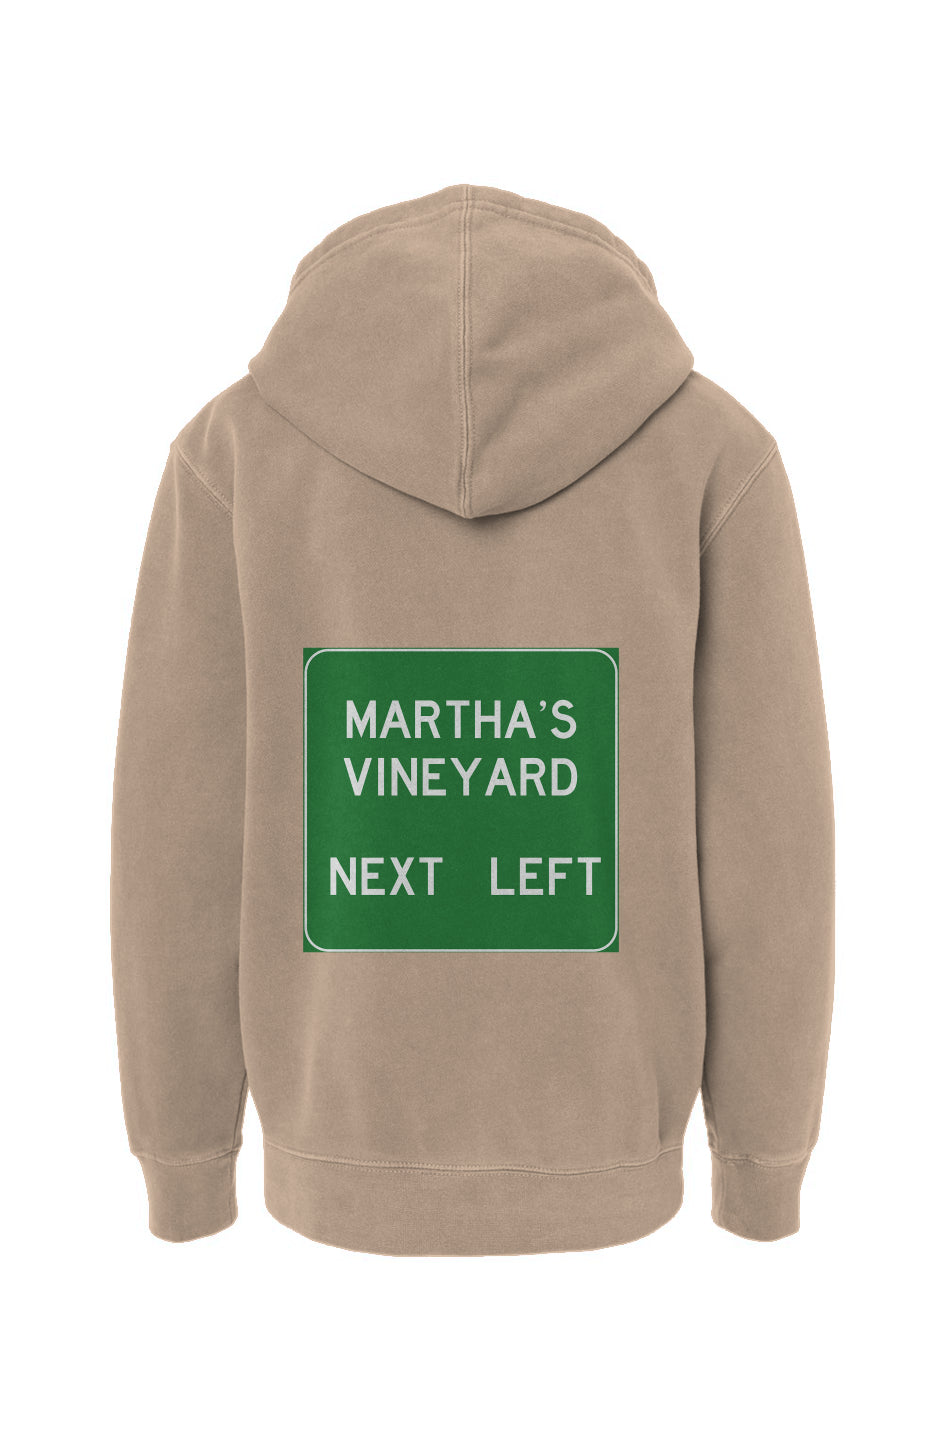 Next Left Youth Hoodie